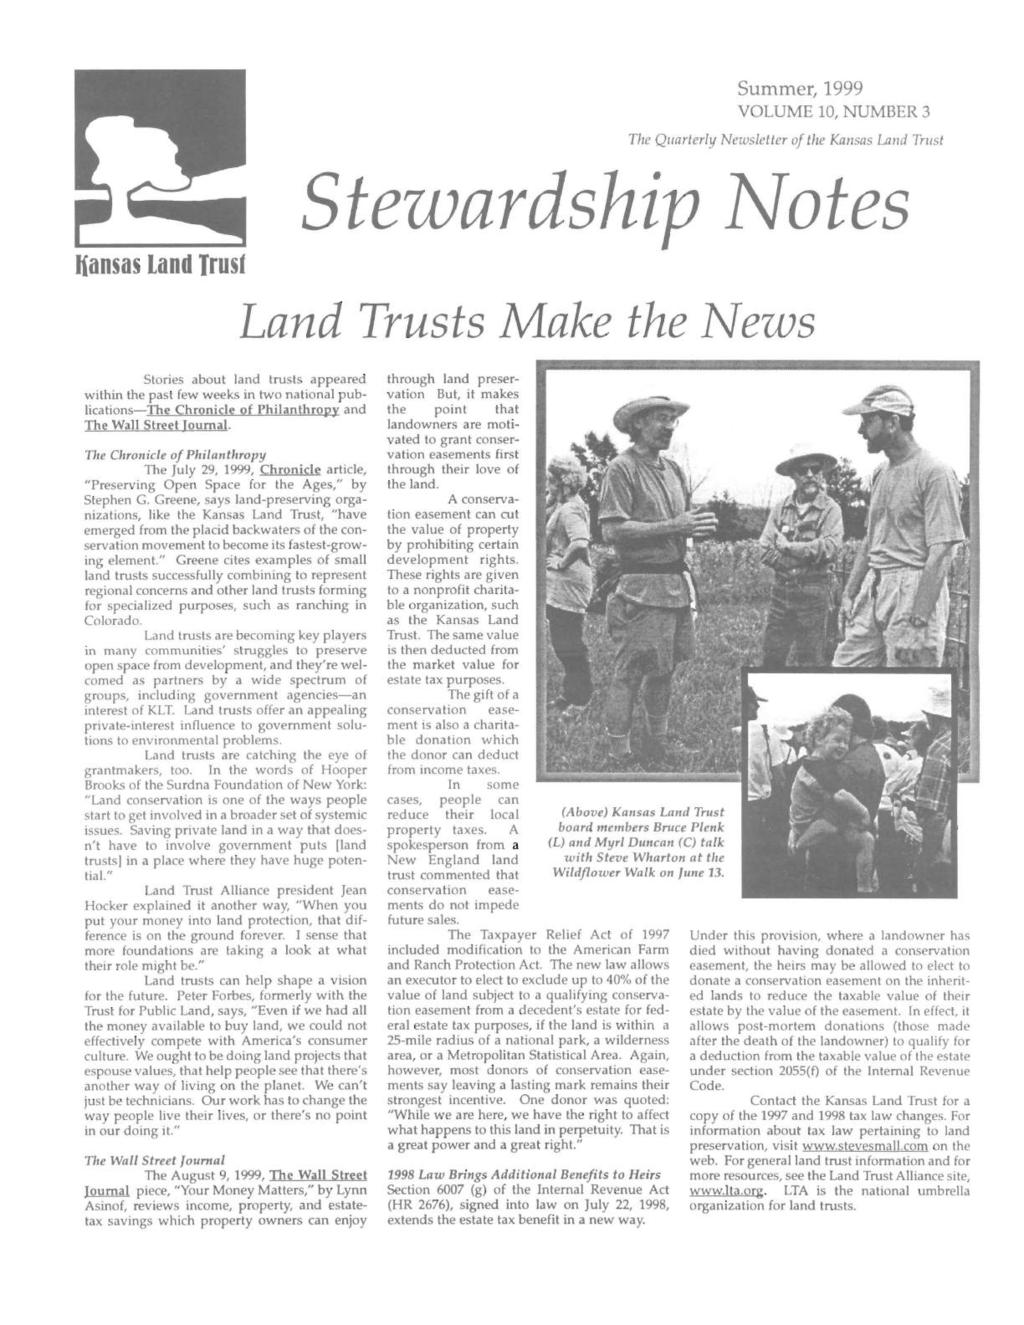 Summer, 1999 VOLUME 10, NUMBER 3 The Quarterly Newsletter of the Kansas Land Trust Stezvardship }Votes liansas Land Trust Land Trusts Make the News Stories about land trusts appeared within the past